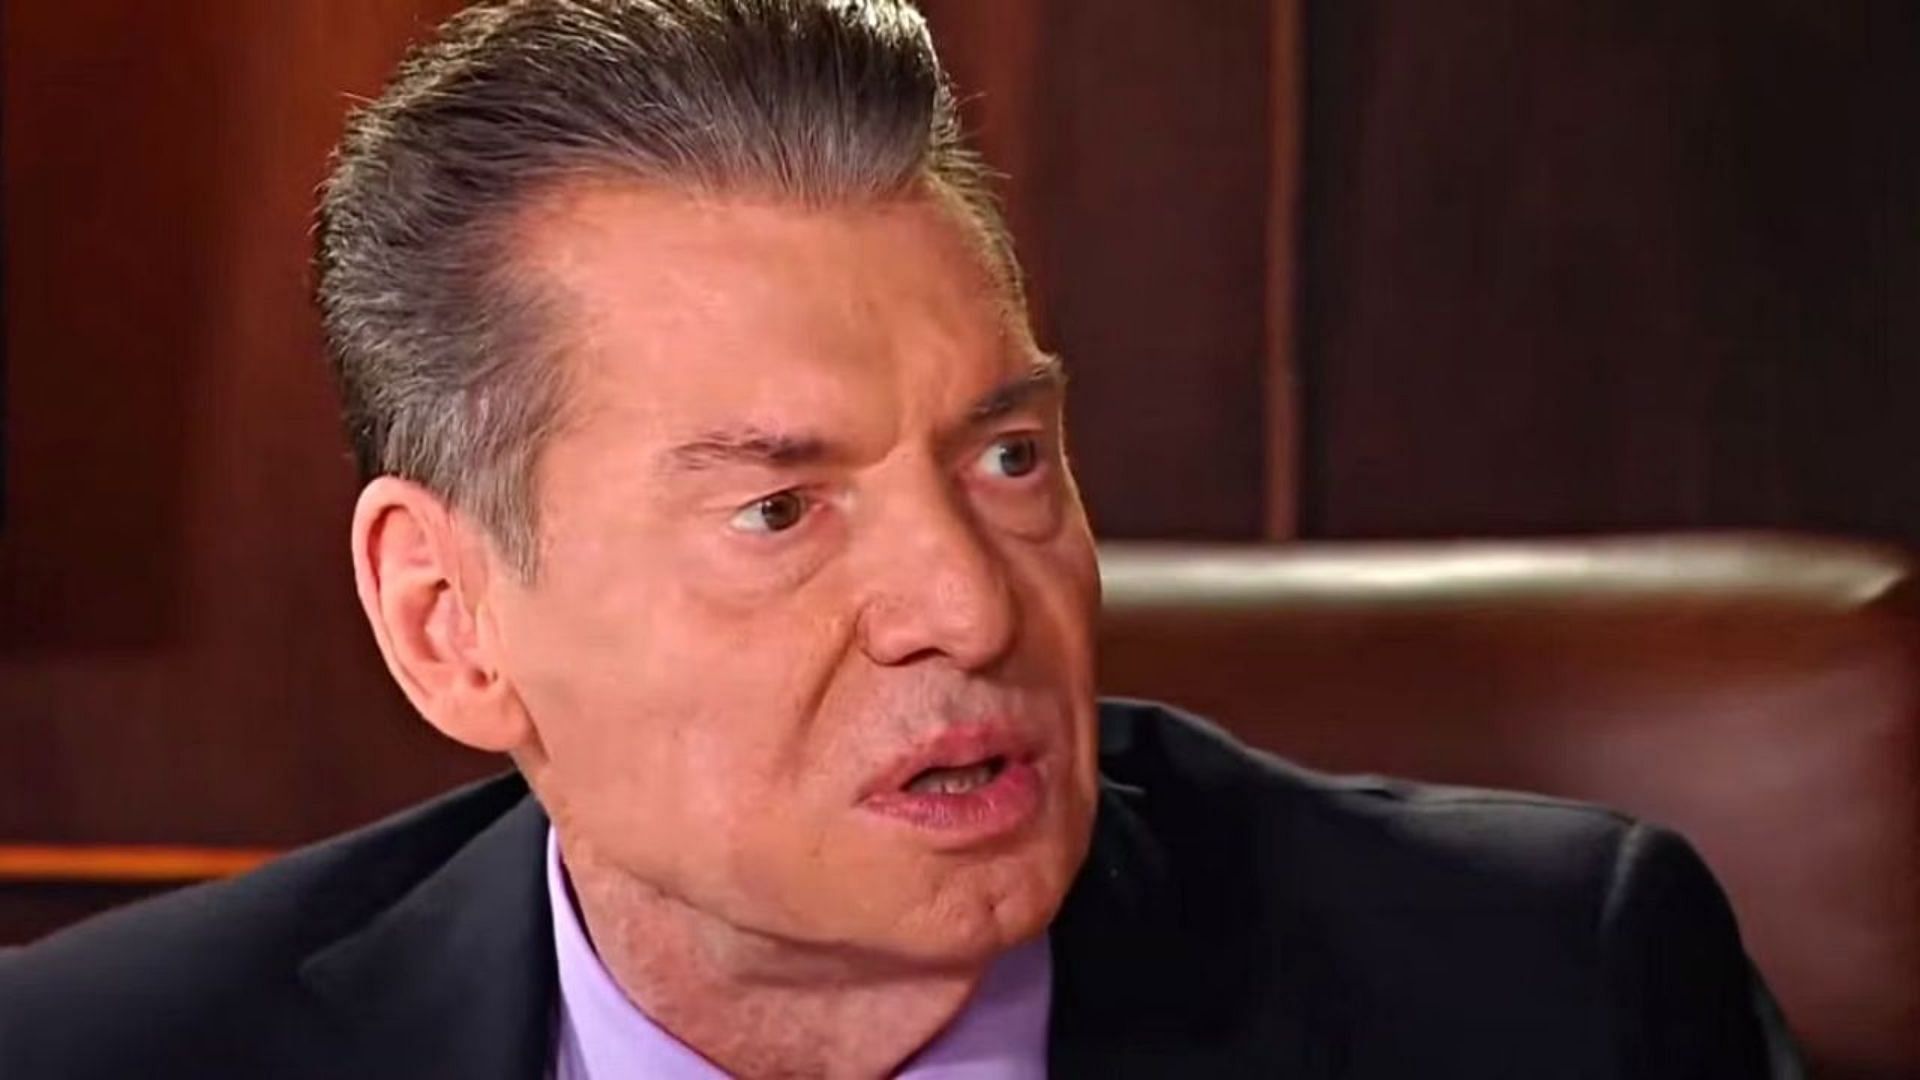 Vince McMahon is no longer the chairman of WWE